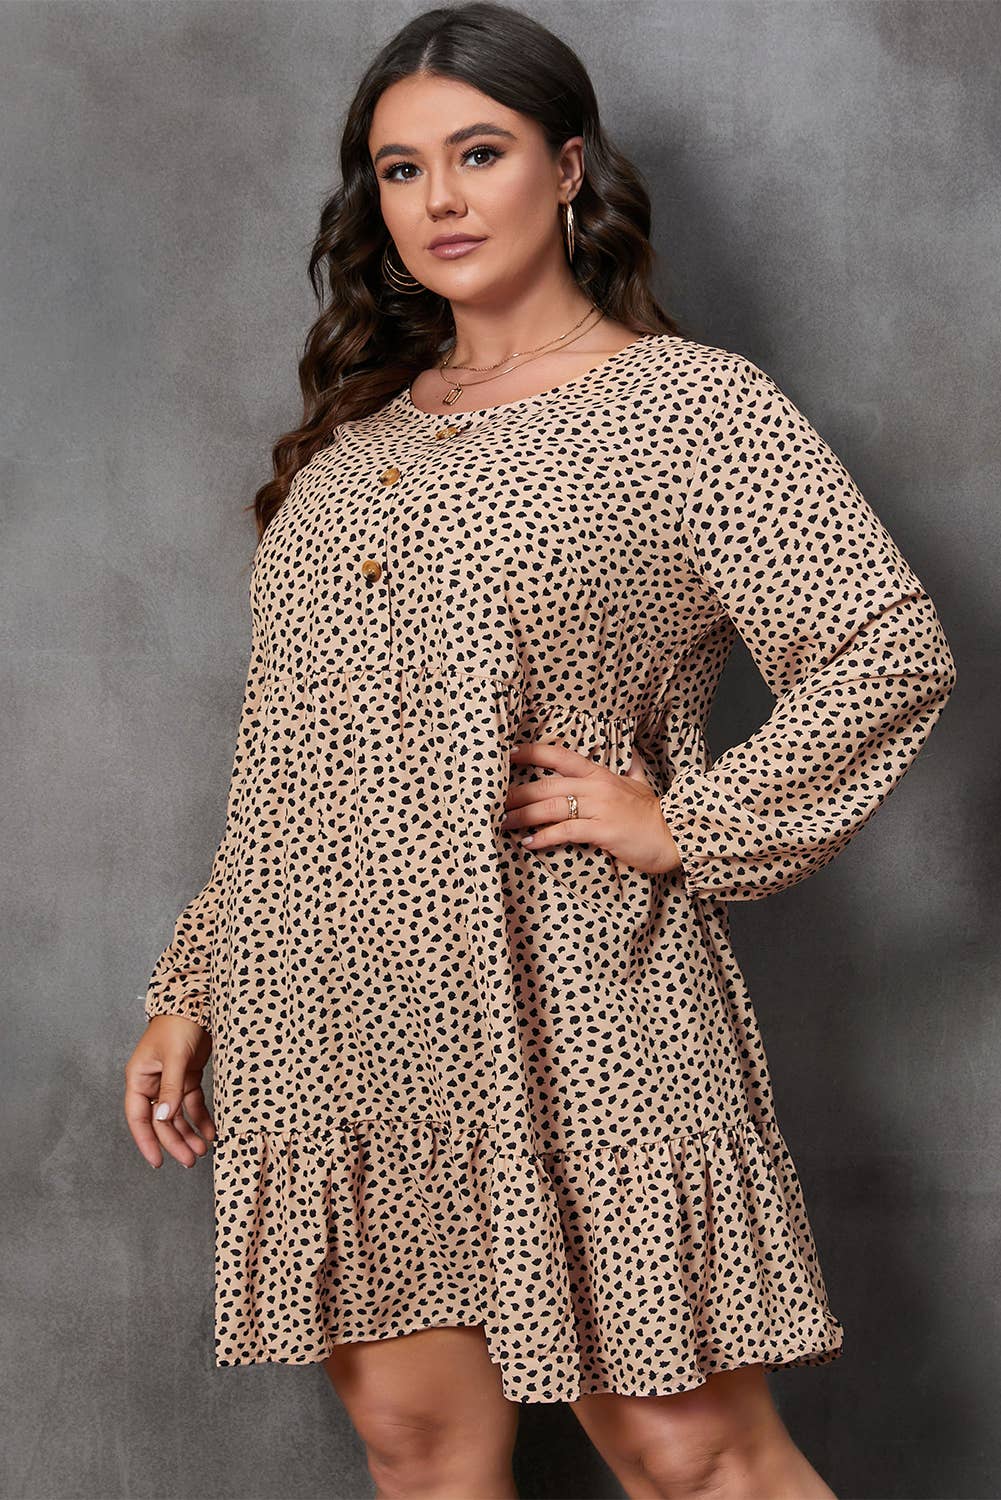 66DISCO Leopard Spotted Print Tiered Long Plus Size Dress